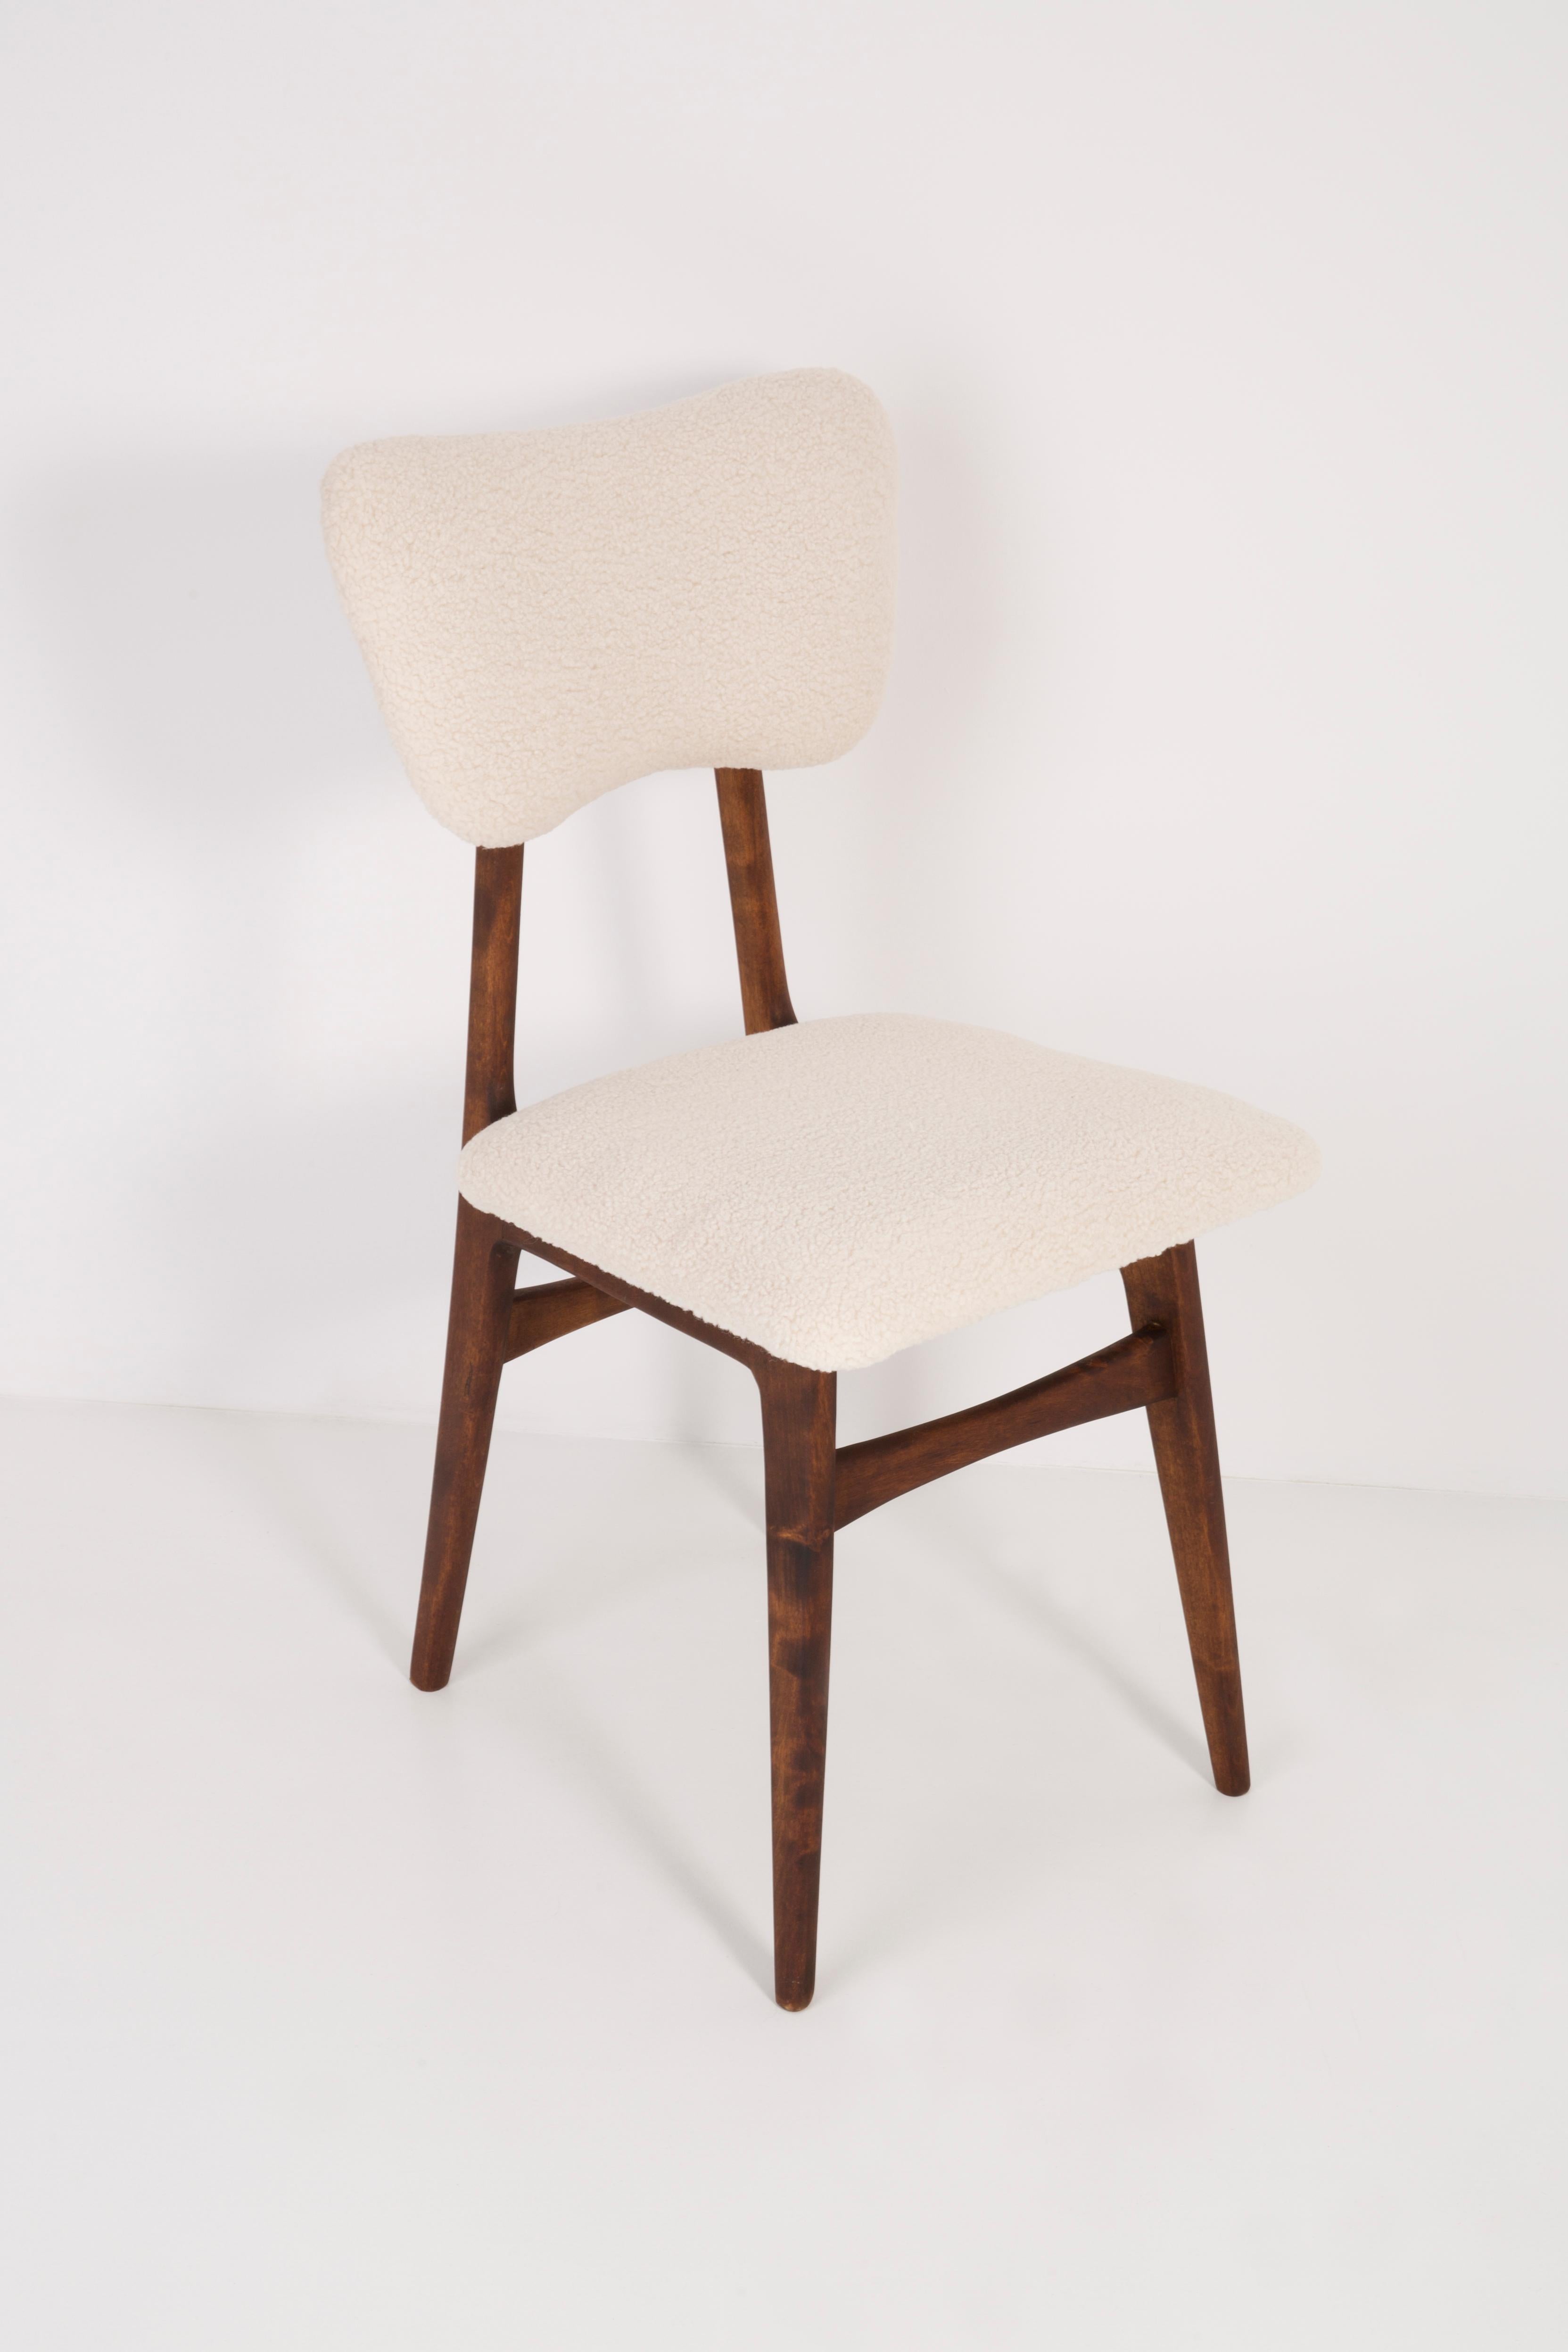 Chair designed by Prof. Rajmund Halas. Made of beechwood. Chair is after a complete upholstery renovation; the woodwork has been refreshed. Seat and back is dressed in crème, durable and pleasant to the touch bouclé fabric. Chair is stabile and very